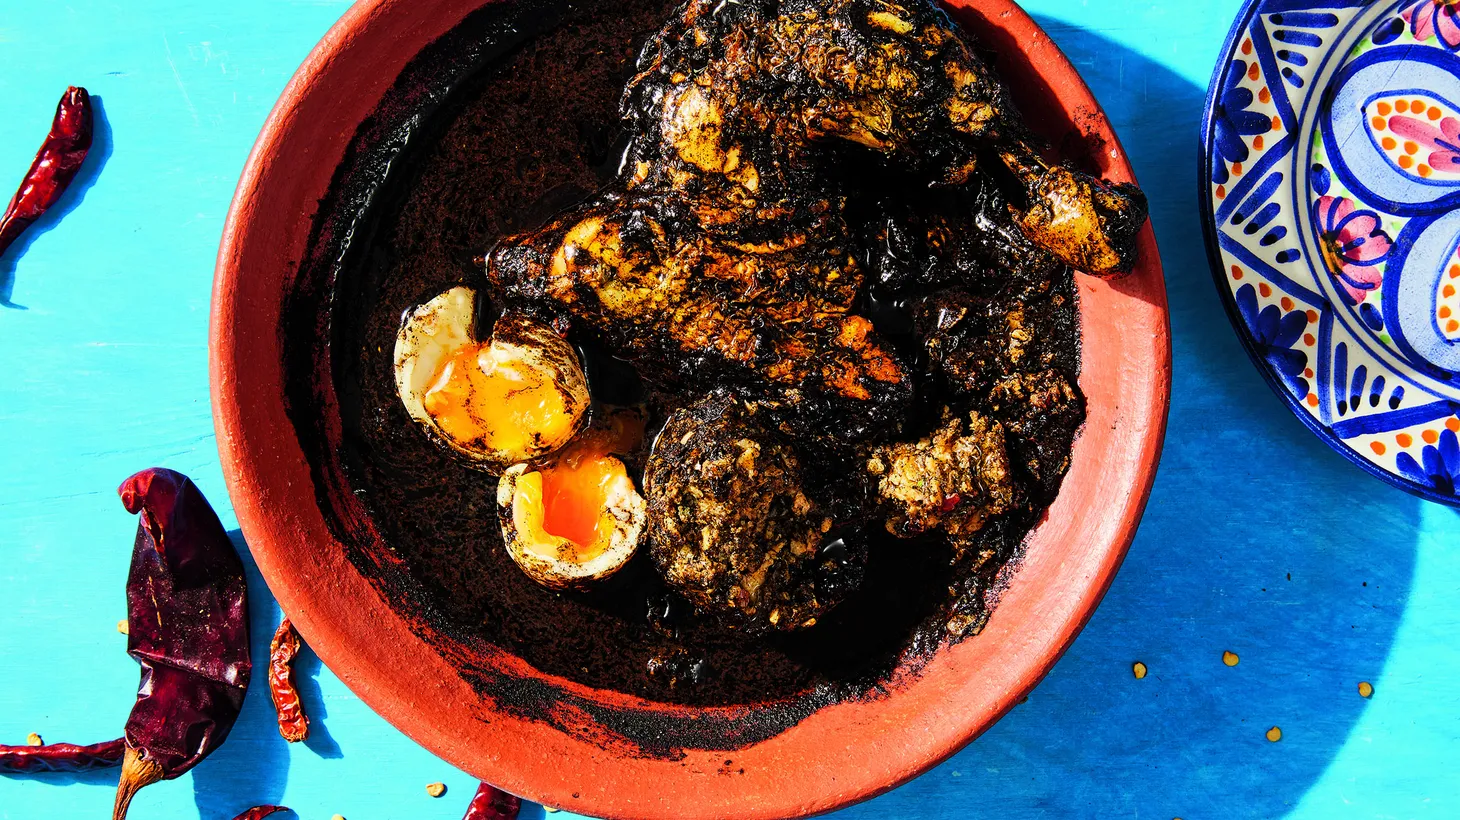 Rick Martínez recalls the first time he tried relleno negro, a dish from Yucatan, at a taco stand where he was intrigued by the smell and deep color.